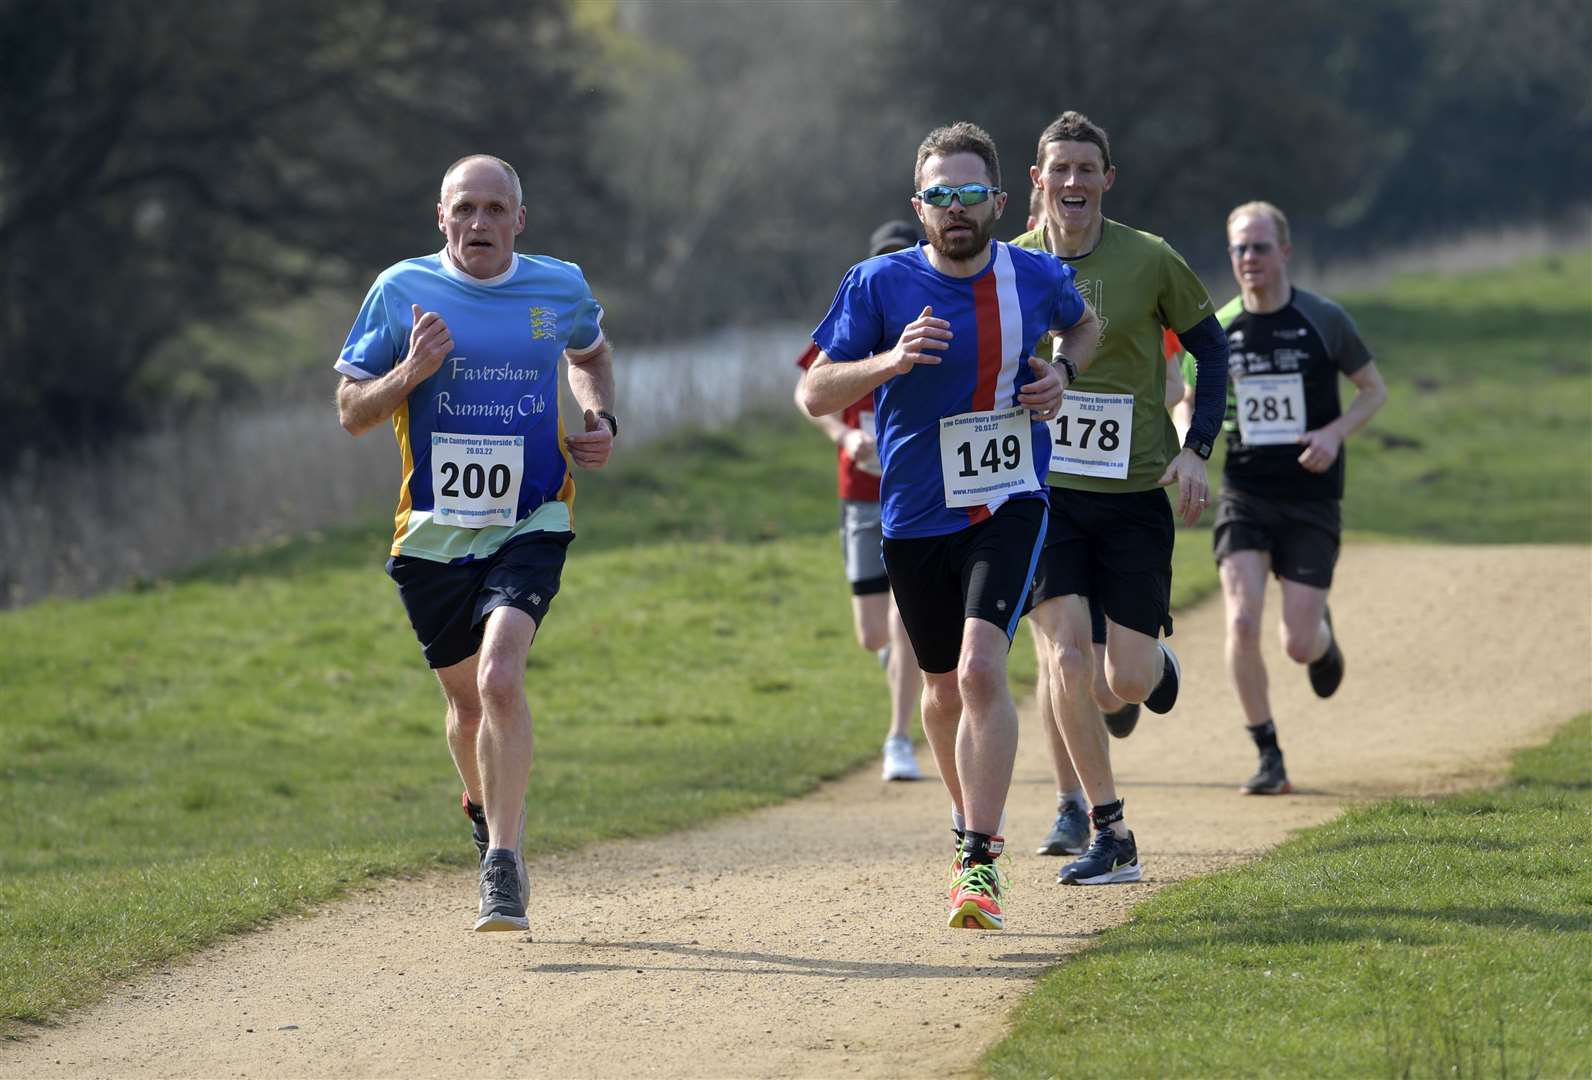 David Sadler (number 200) from Faversham Running Club finished sixth while Ian Merrick (number 149) was eighth. Picture: Barry Goodwin